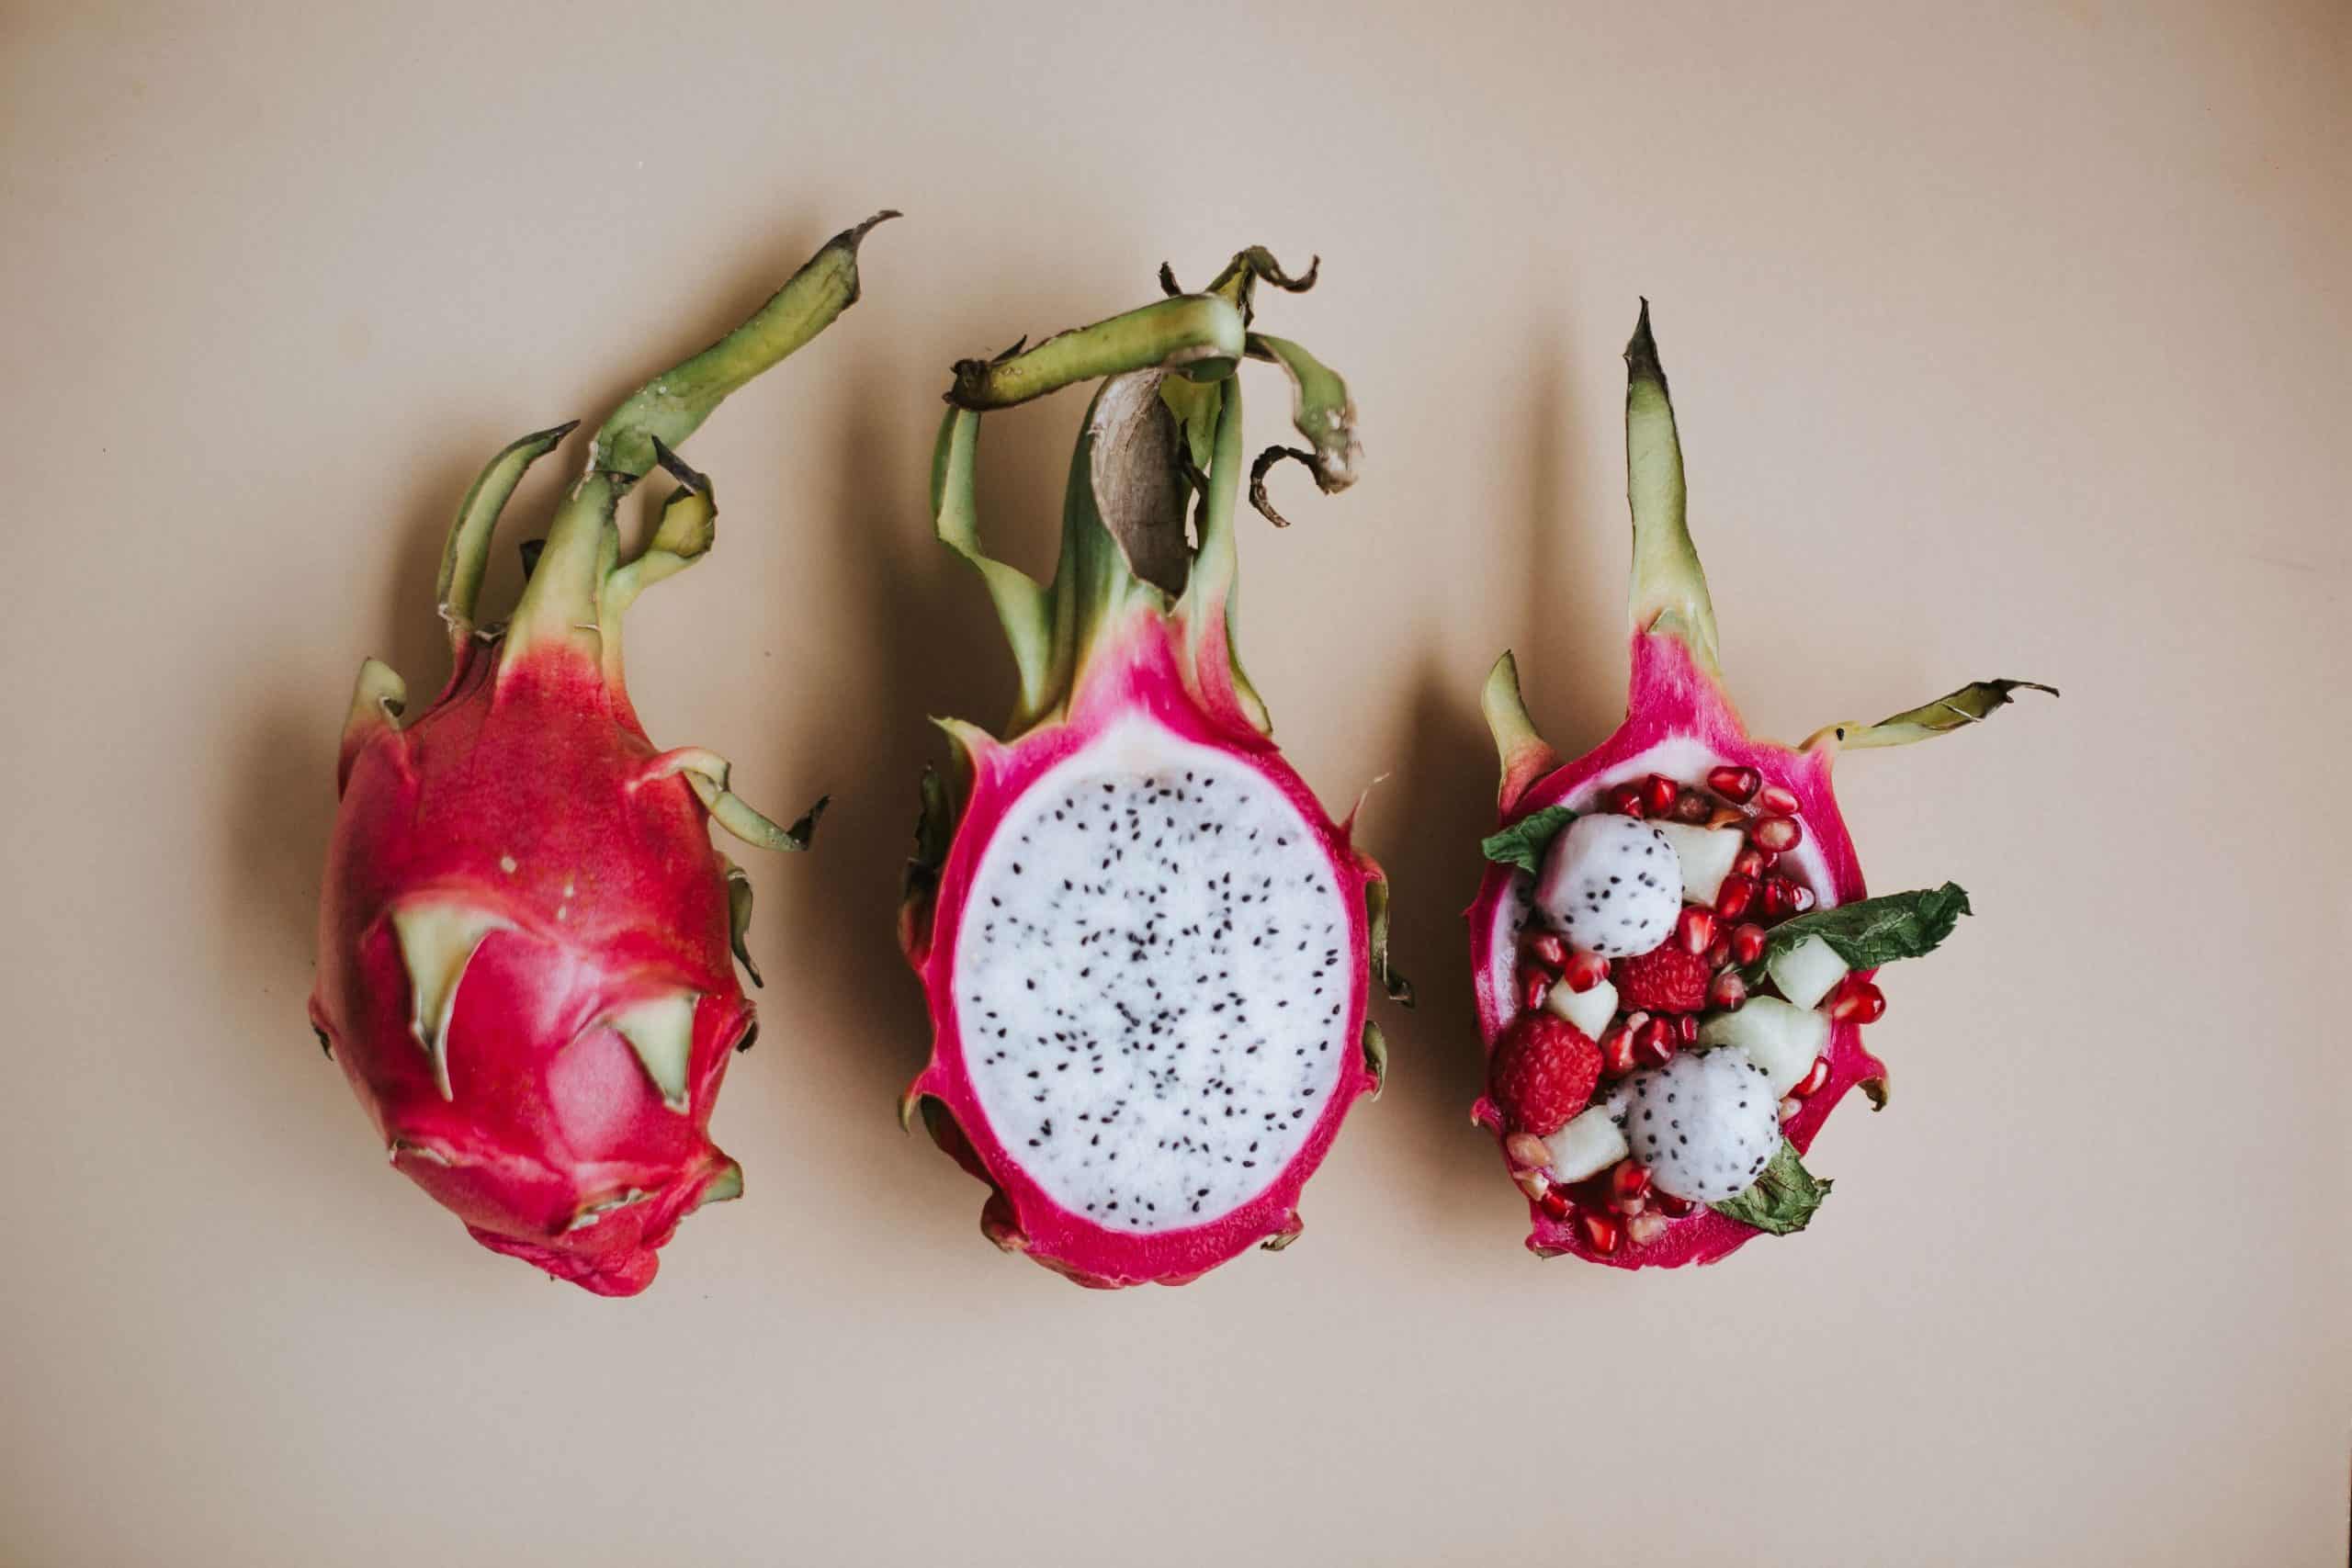 Facts You Should Know About Benefits Of Eating Dragon Fruit